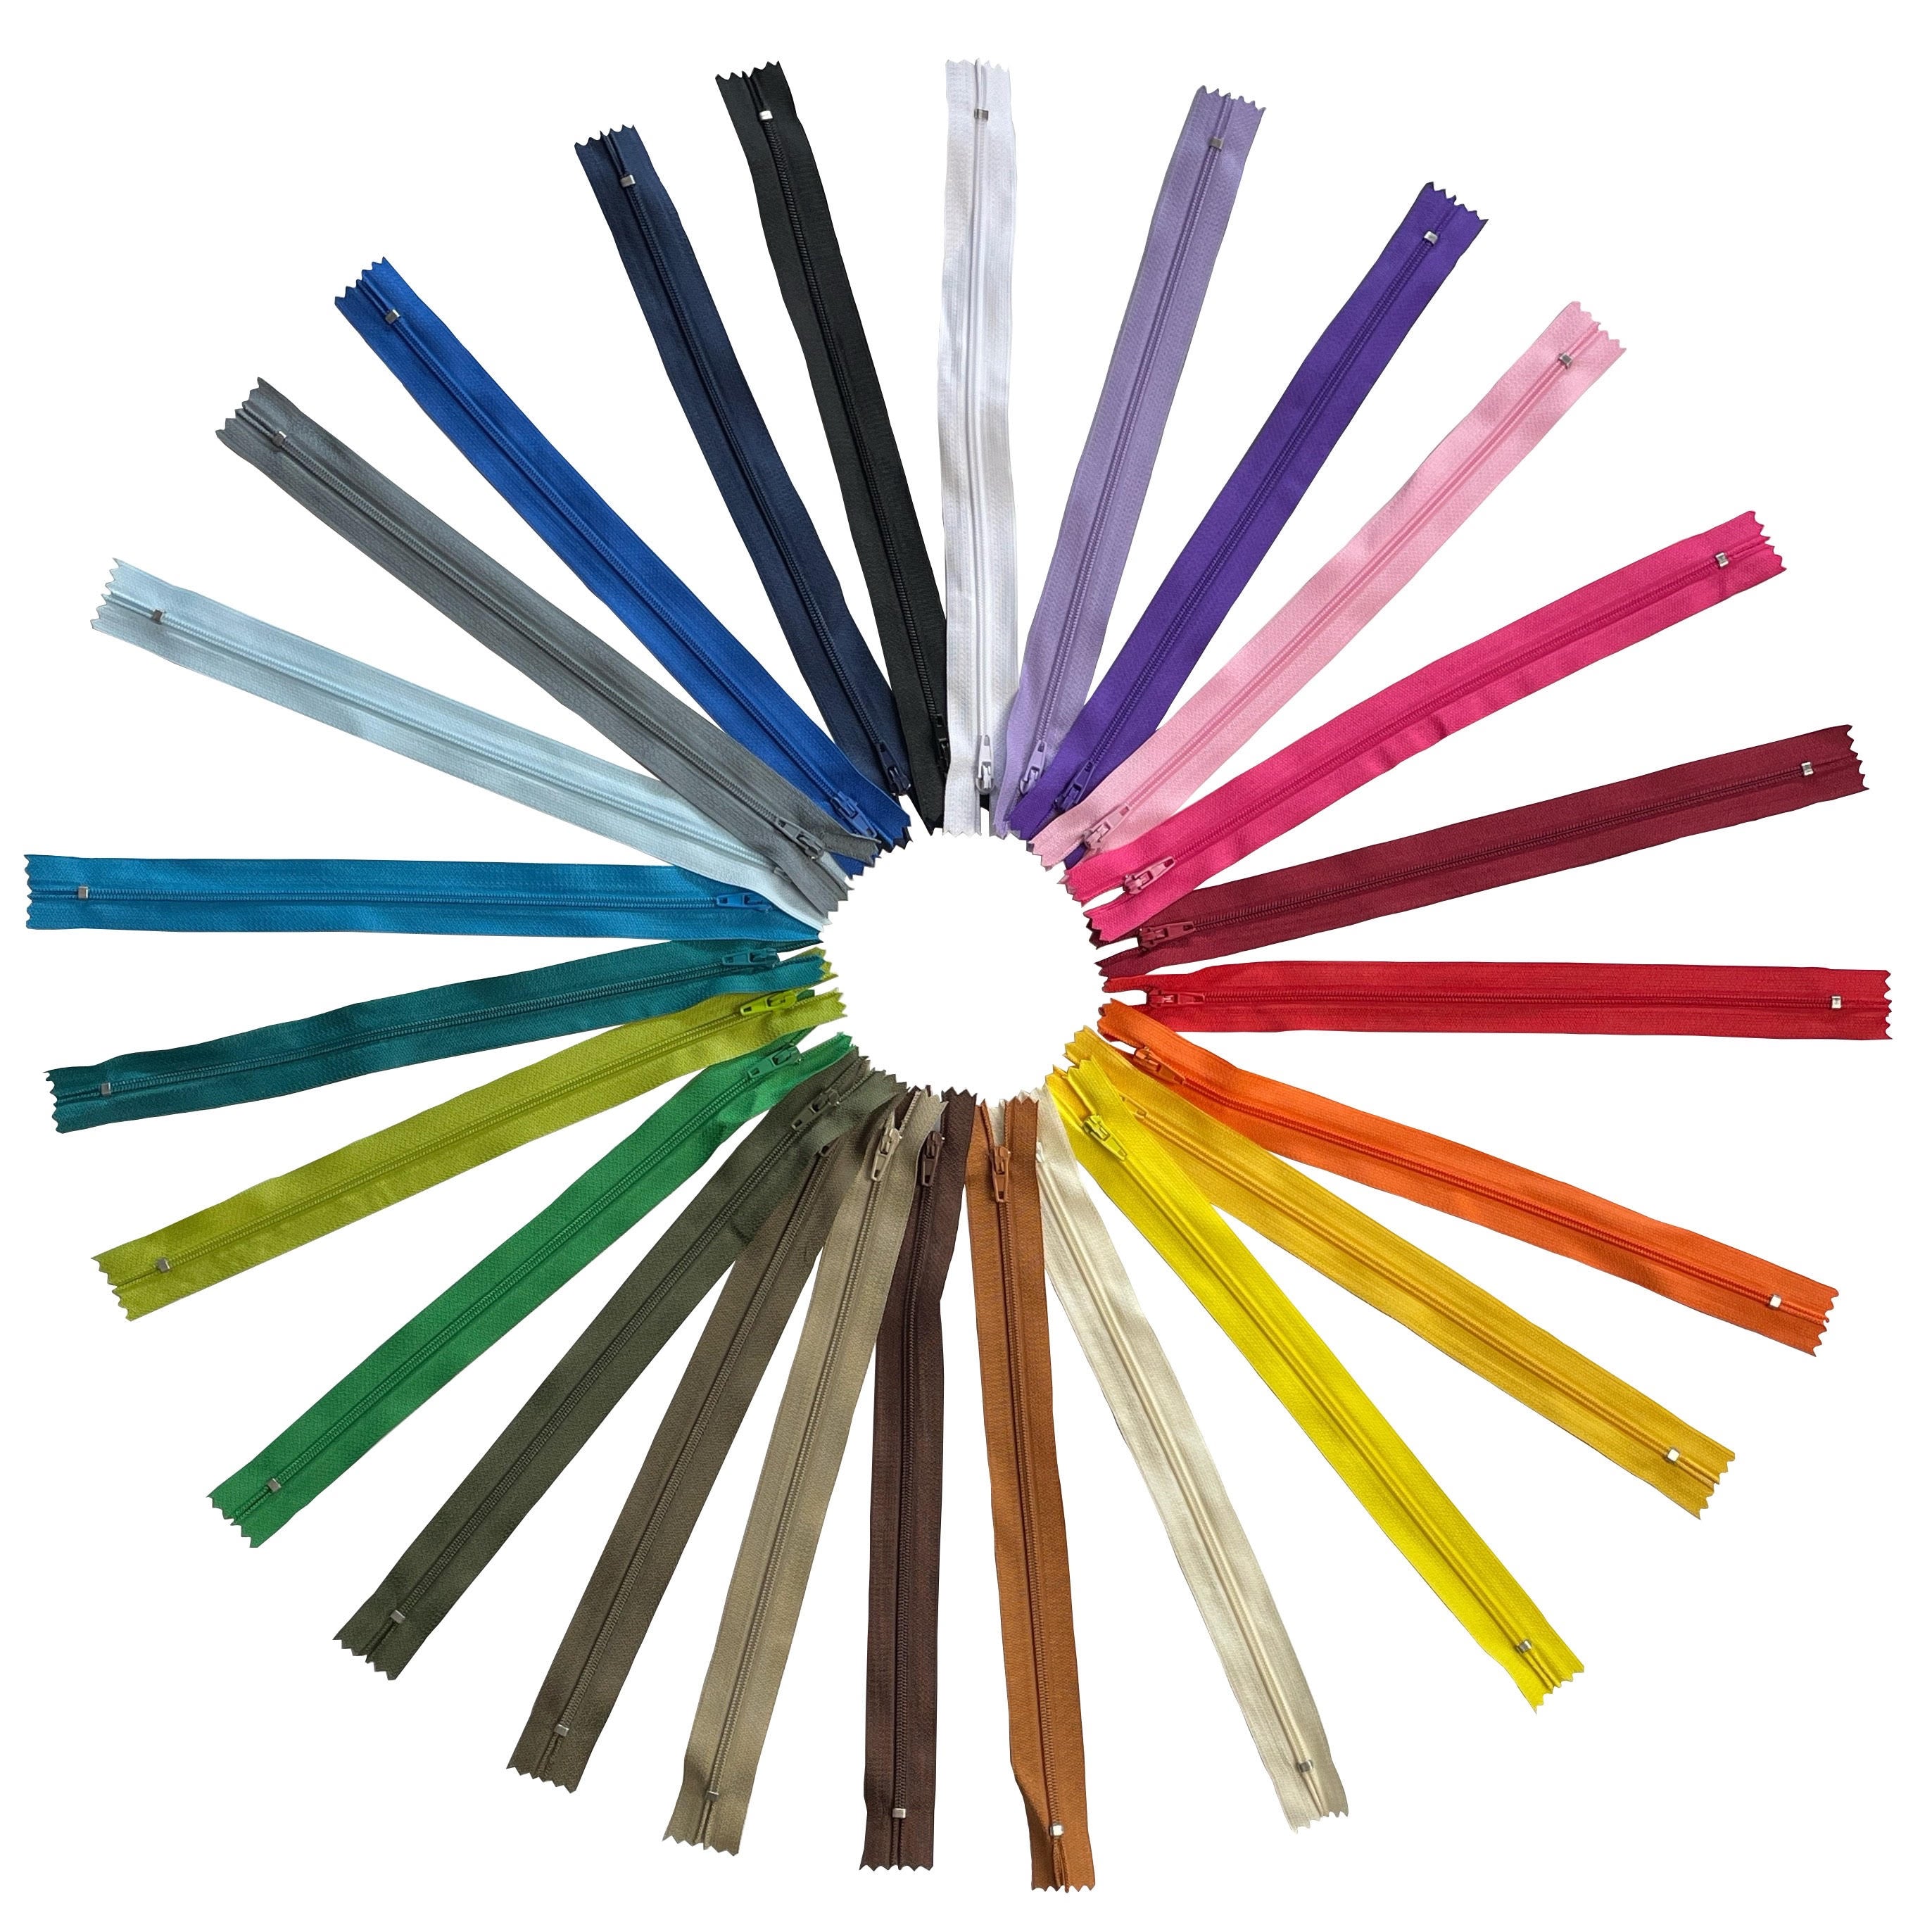 nylon zippers in the standard coil shown style in 25 colours and 5 sizes